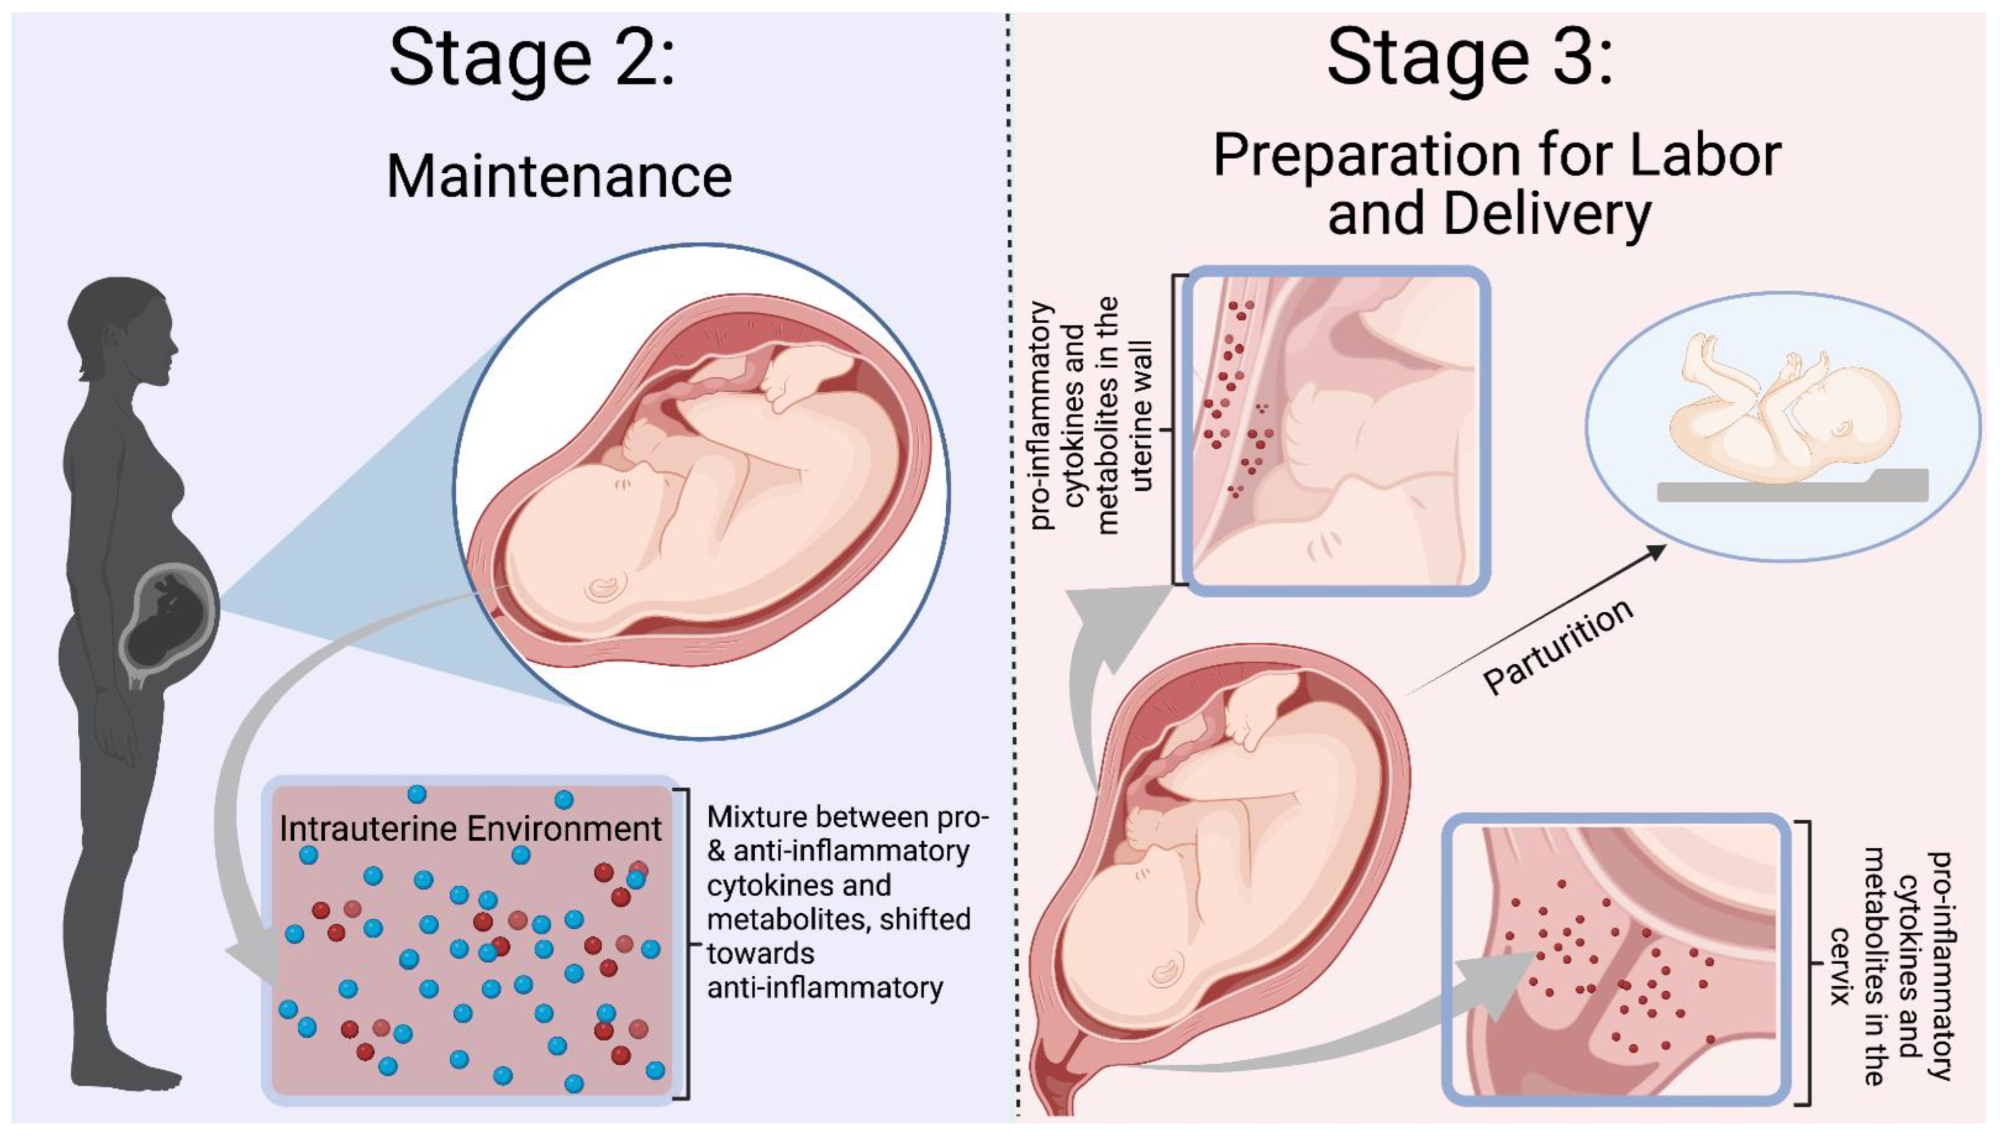 Mo et al. Stages 2-3 of immunological events that occur during pregnancy. Stage 2 is defined by a balance of pro- and anti-inflammatory mediators and involves a transition to an anti-inflammatory environment. Inflammation is necessary to prevent fetal infection and rejection. Stage 3 is the pro-inflammatory condition that prepares for labor and delivery. Cytokines and mediators remodel the cervix, infiltrate the uterus and participate in uterine contractions. Blue dots represent anti-inflammatory molecules and red dots represent pro-inflammatory molecules. The figure was created with Violender.